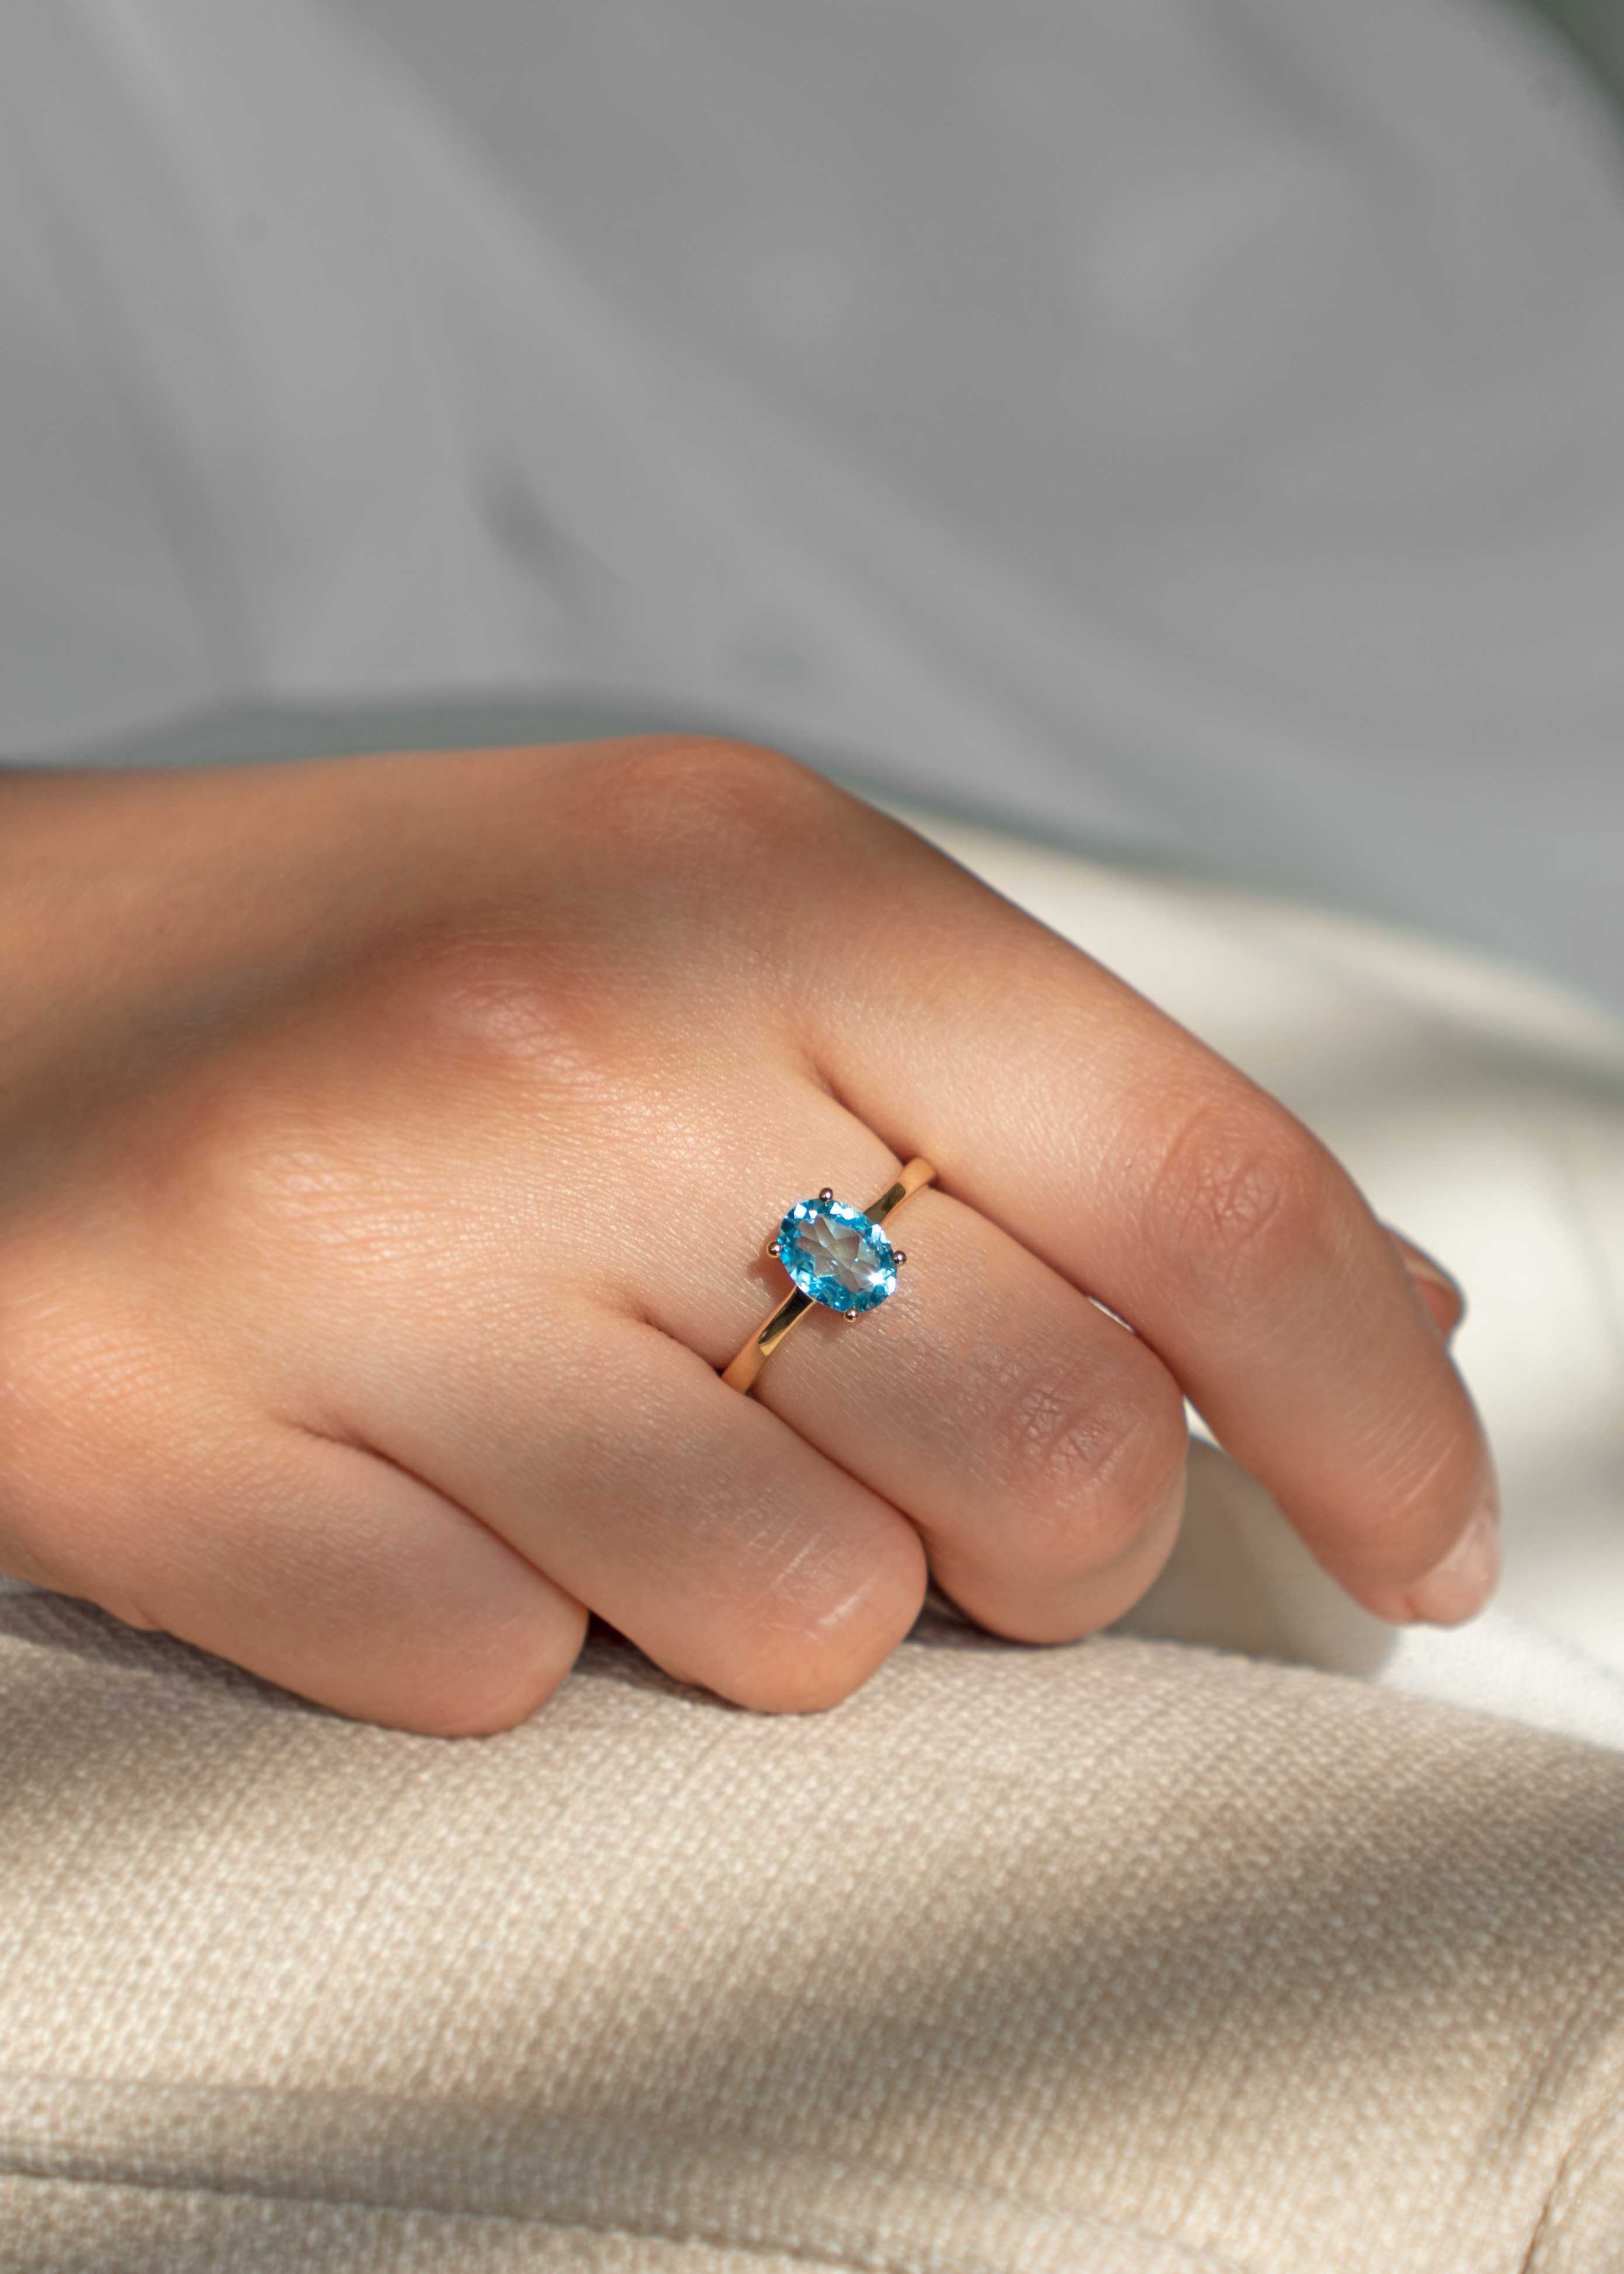 Swiss Blue Topaz Ring in 14k gold vermeil, Engagement, Promise Gifts for Her